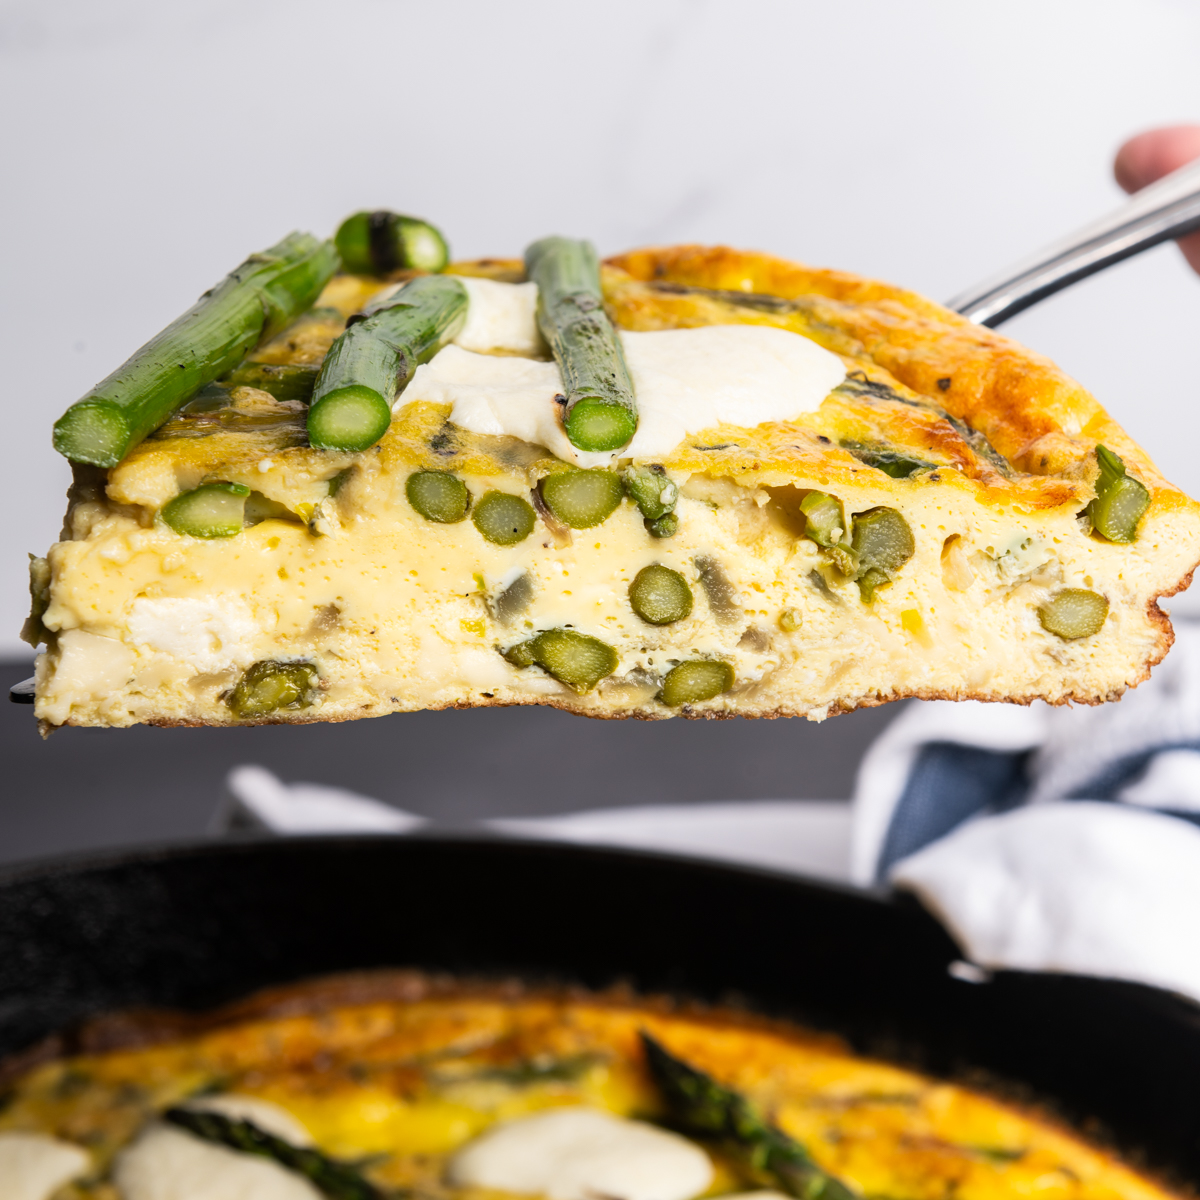 A slice of asparagus frittata showing the creamy inside.